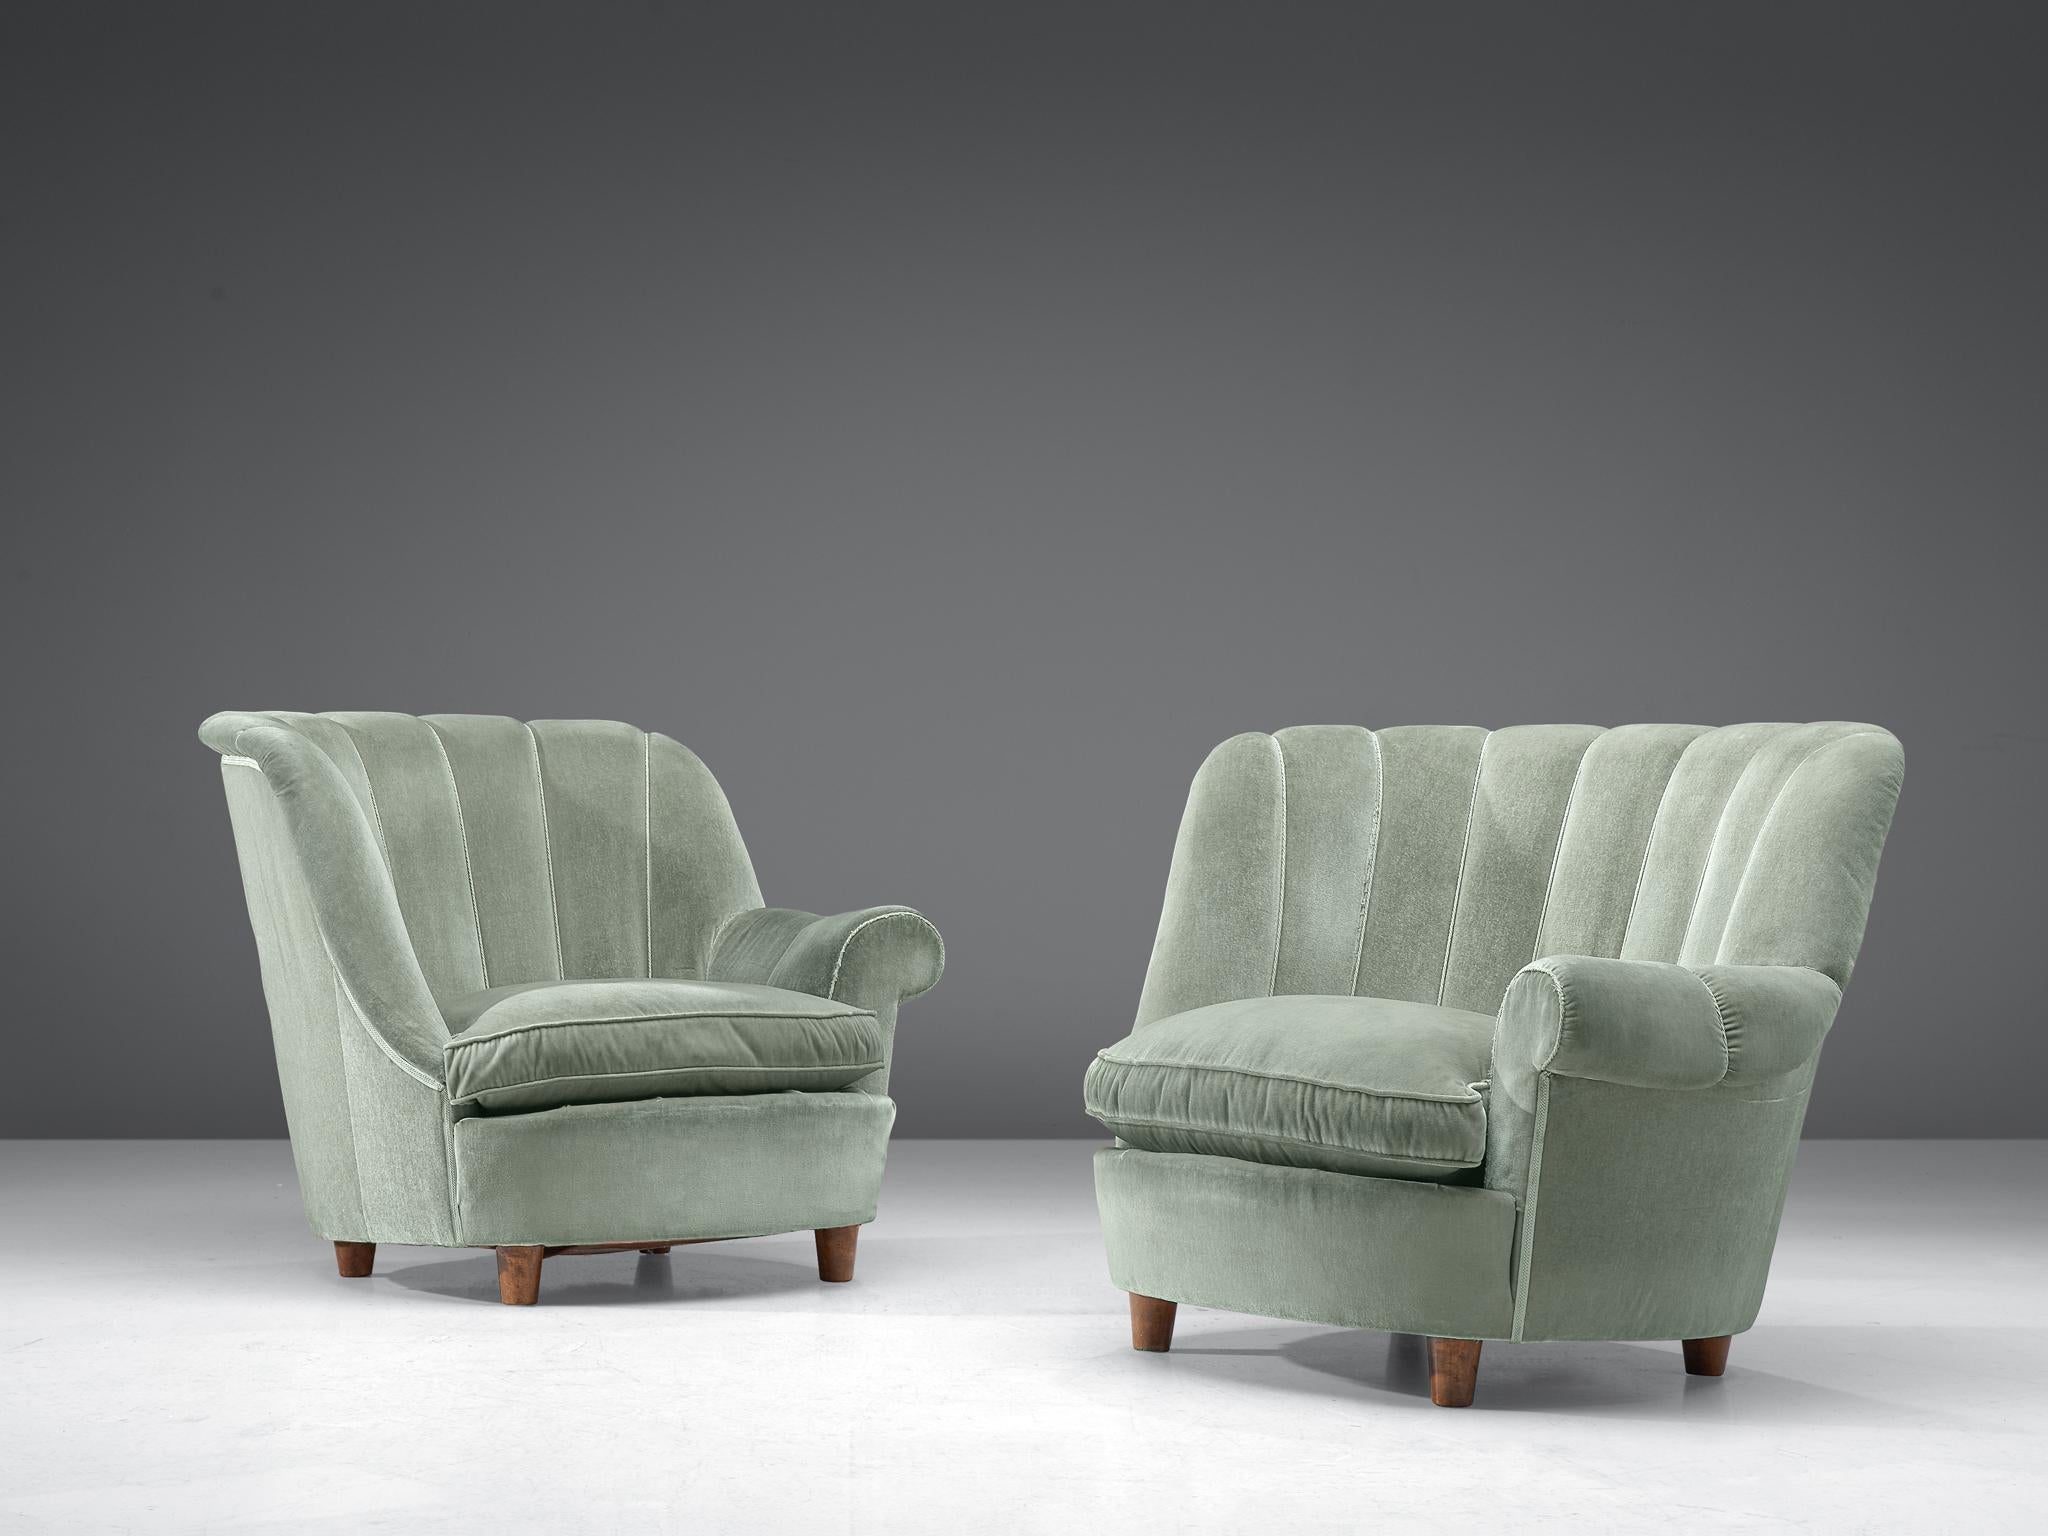 Carl Malmsten, pair of lounge chairs 'Redet', velvet and beech, Sweden, 1930s

A soft curved back that flows over in only one armrest per chair. This snuggle-up 